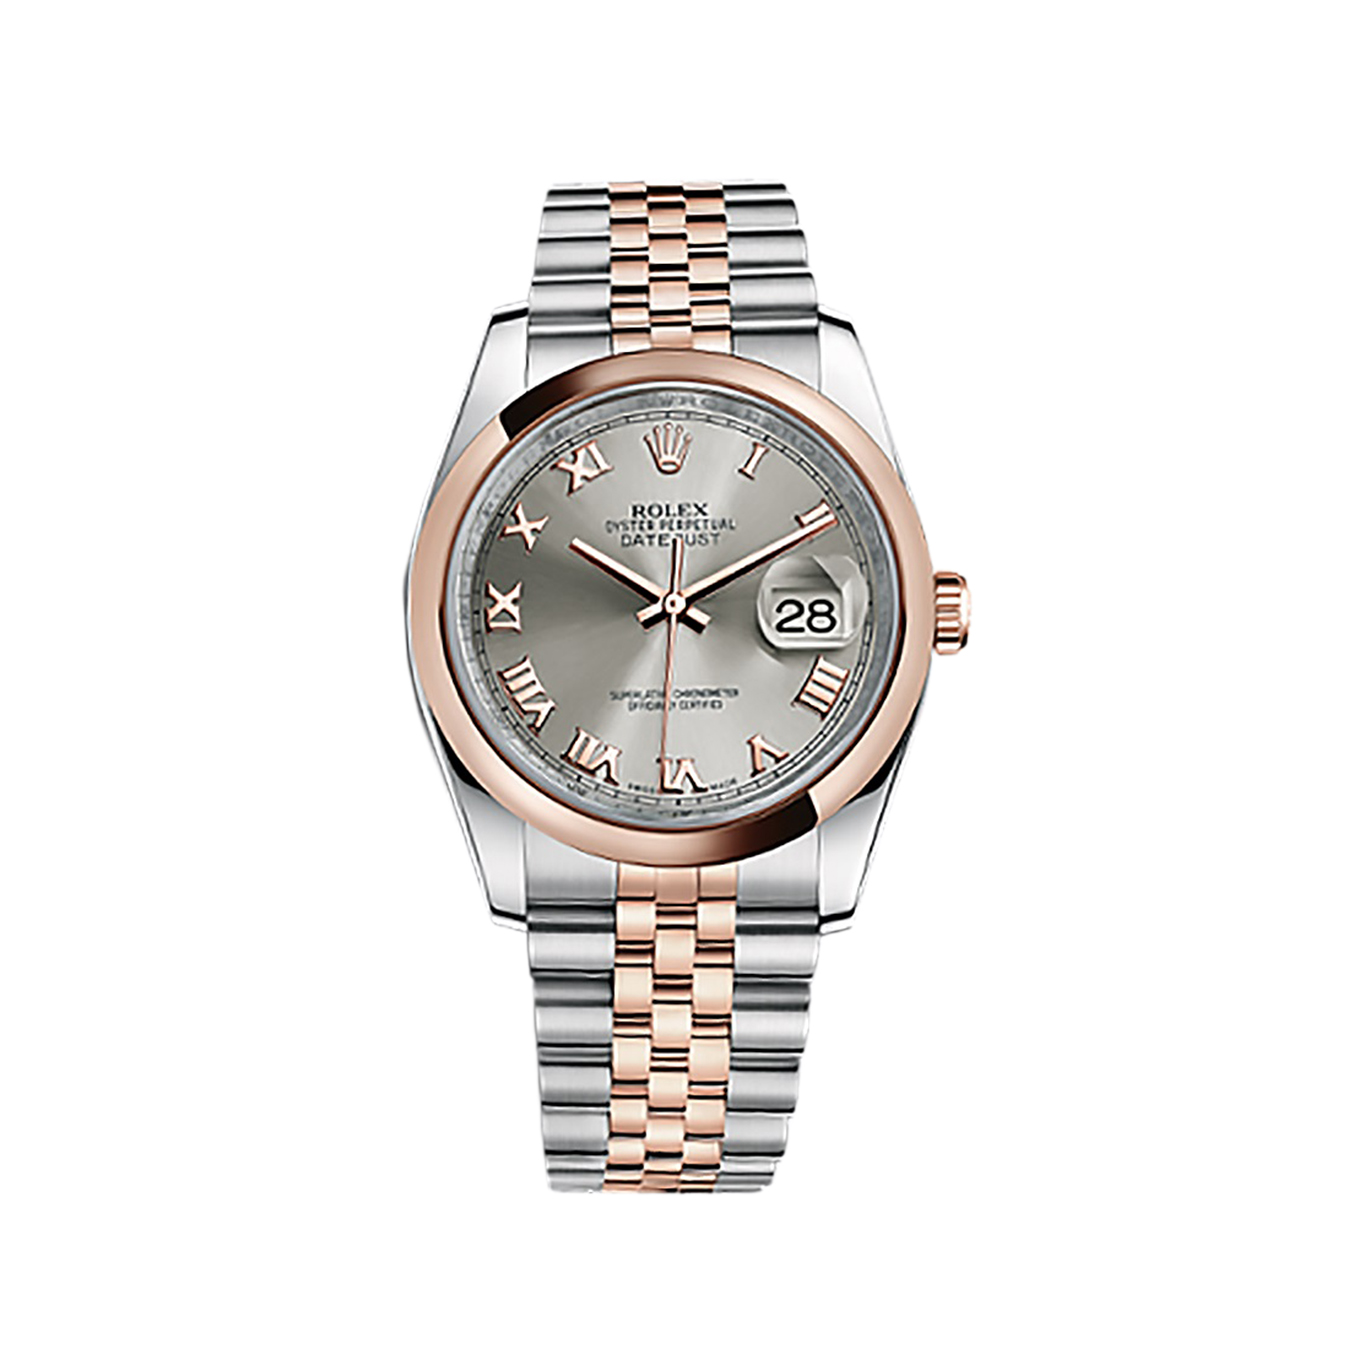 Datejust 36 116201 Rose Gold & Stainless Steel Watch (Steel) - Click Image to Close